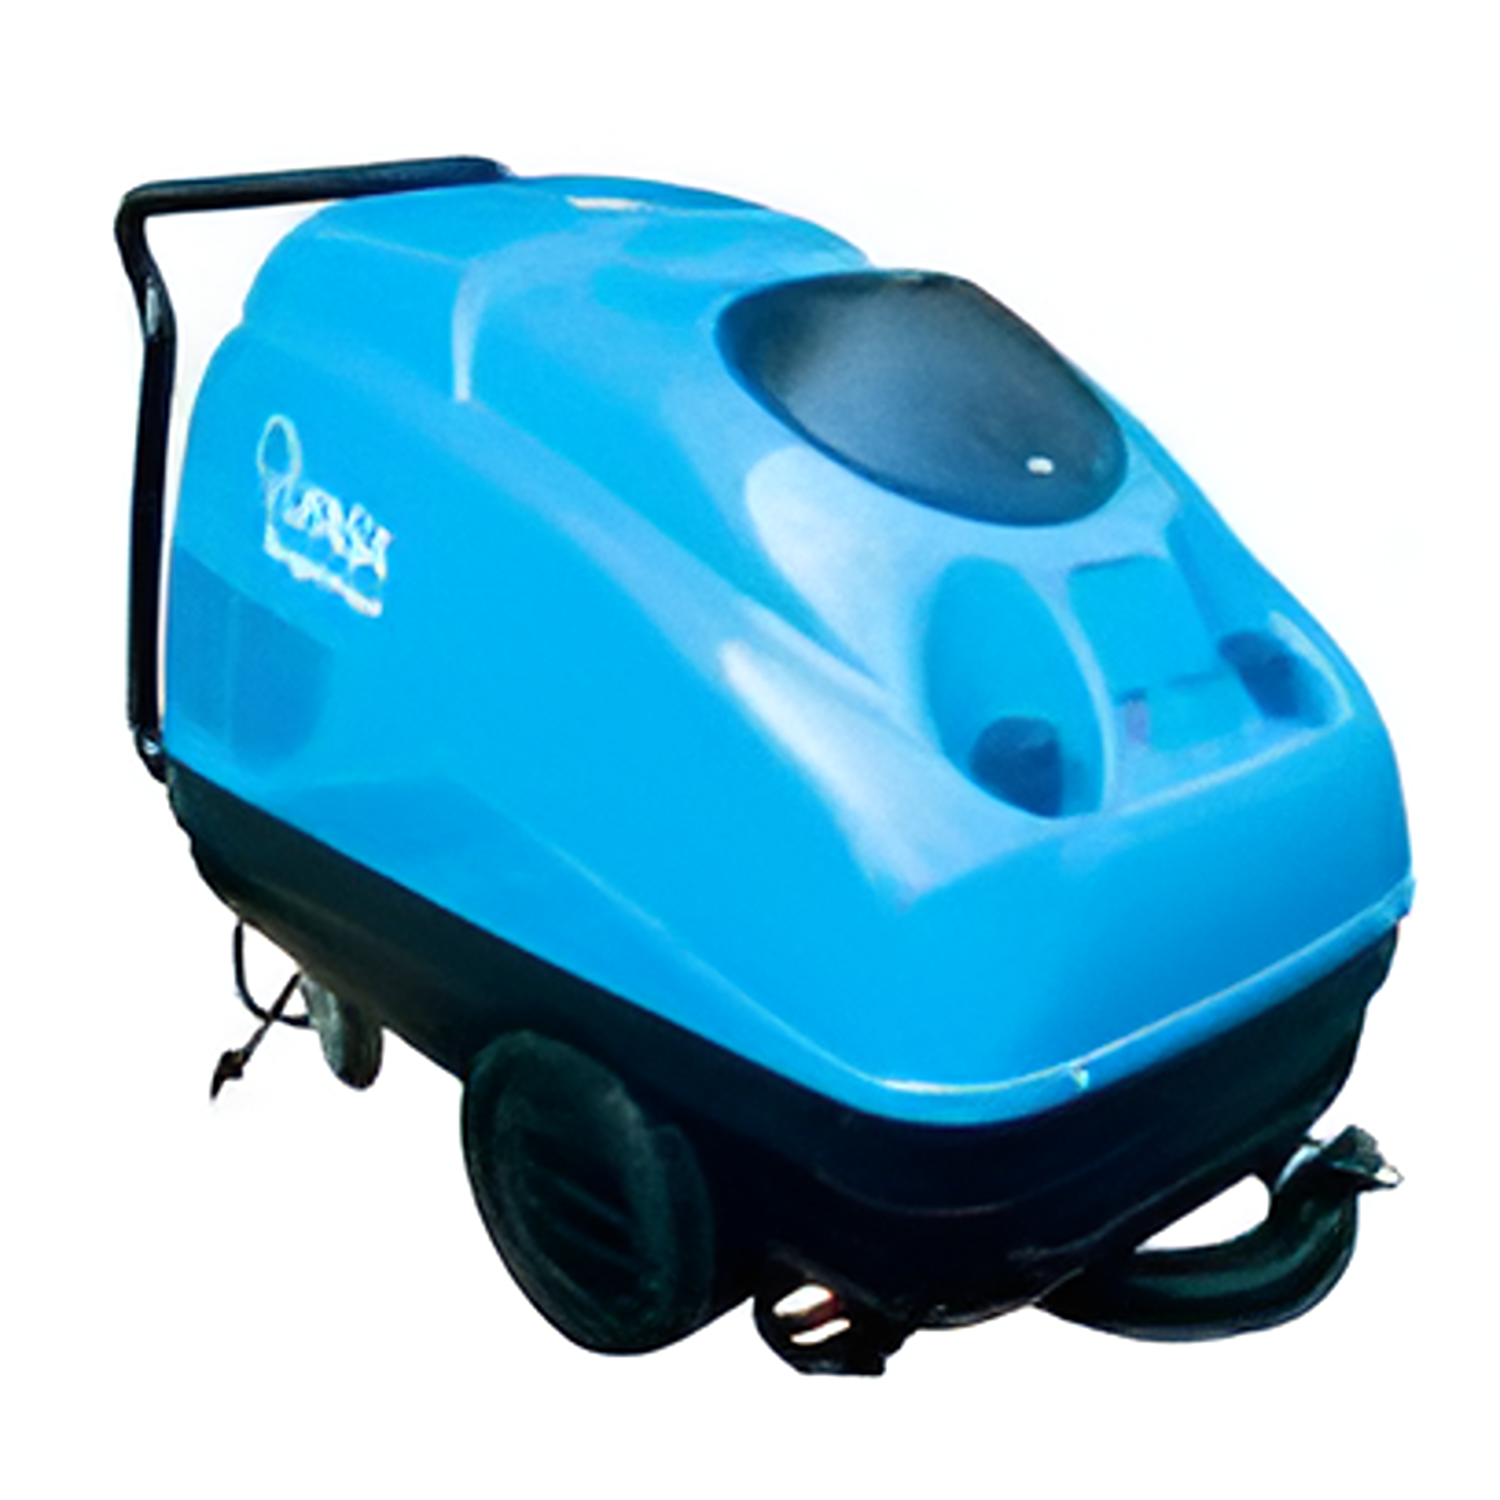 Yew Aik AA00190 Hot Water High Pressure Cleaner - Professional - Premium High Pressure Cleaner from YEW AIK - Shop now at Yew Aik.